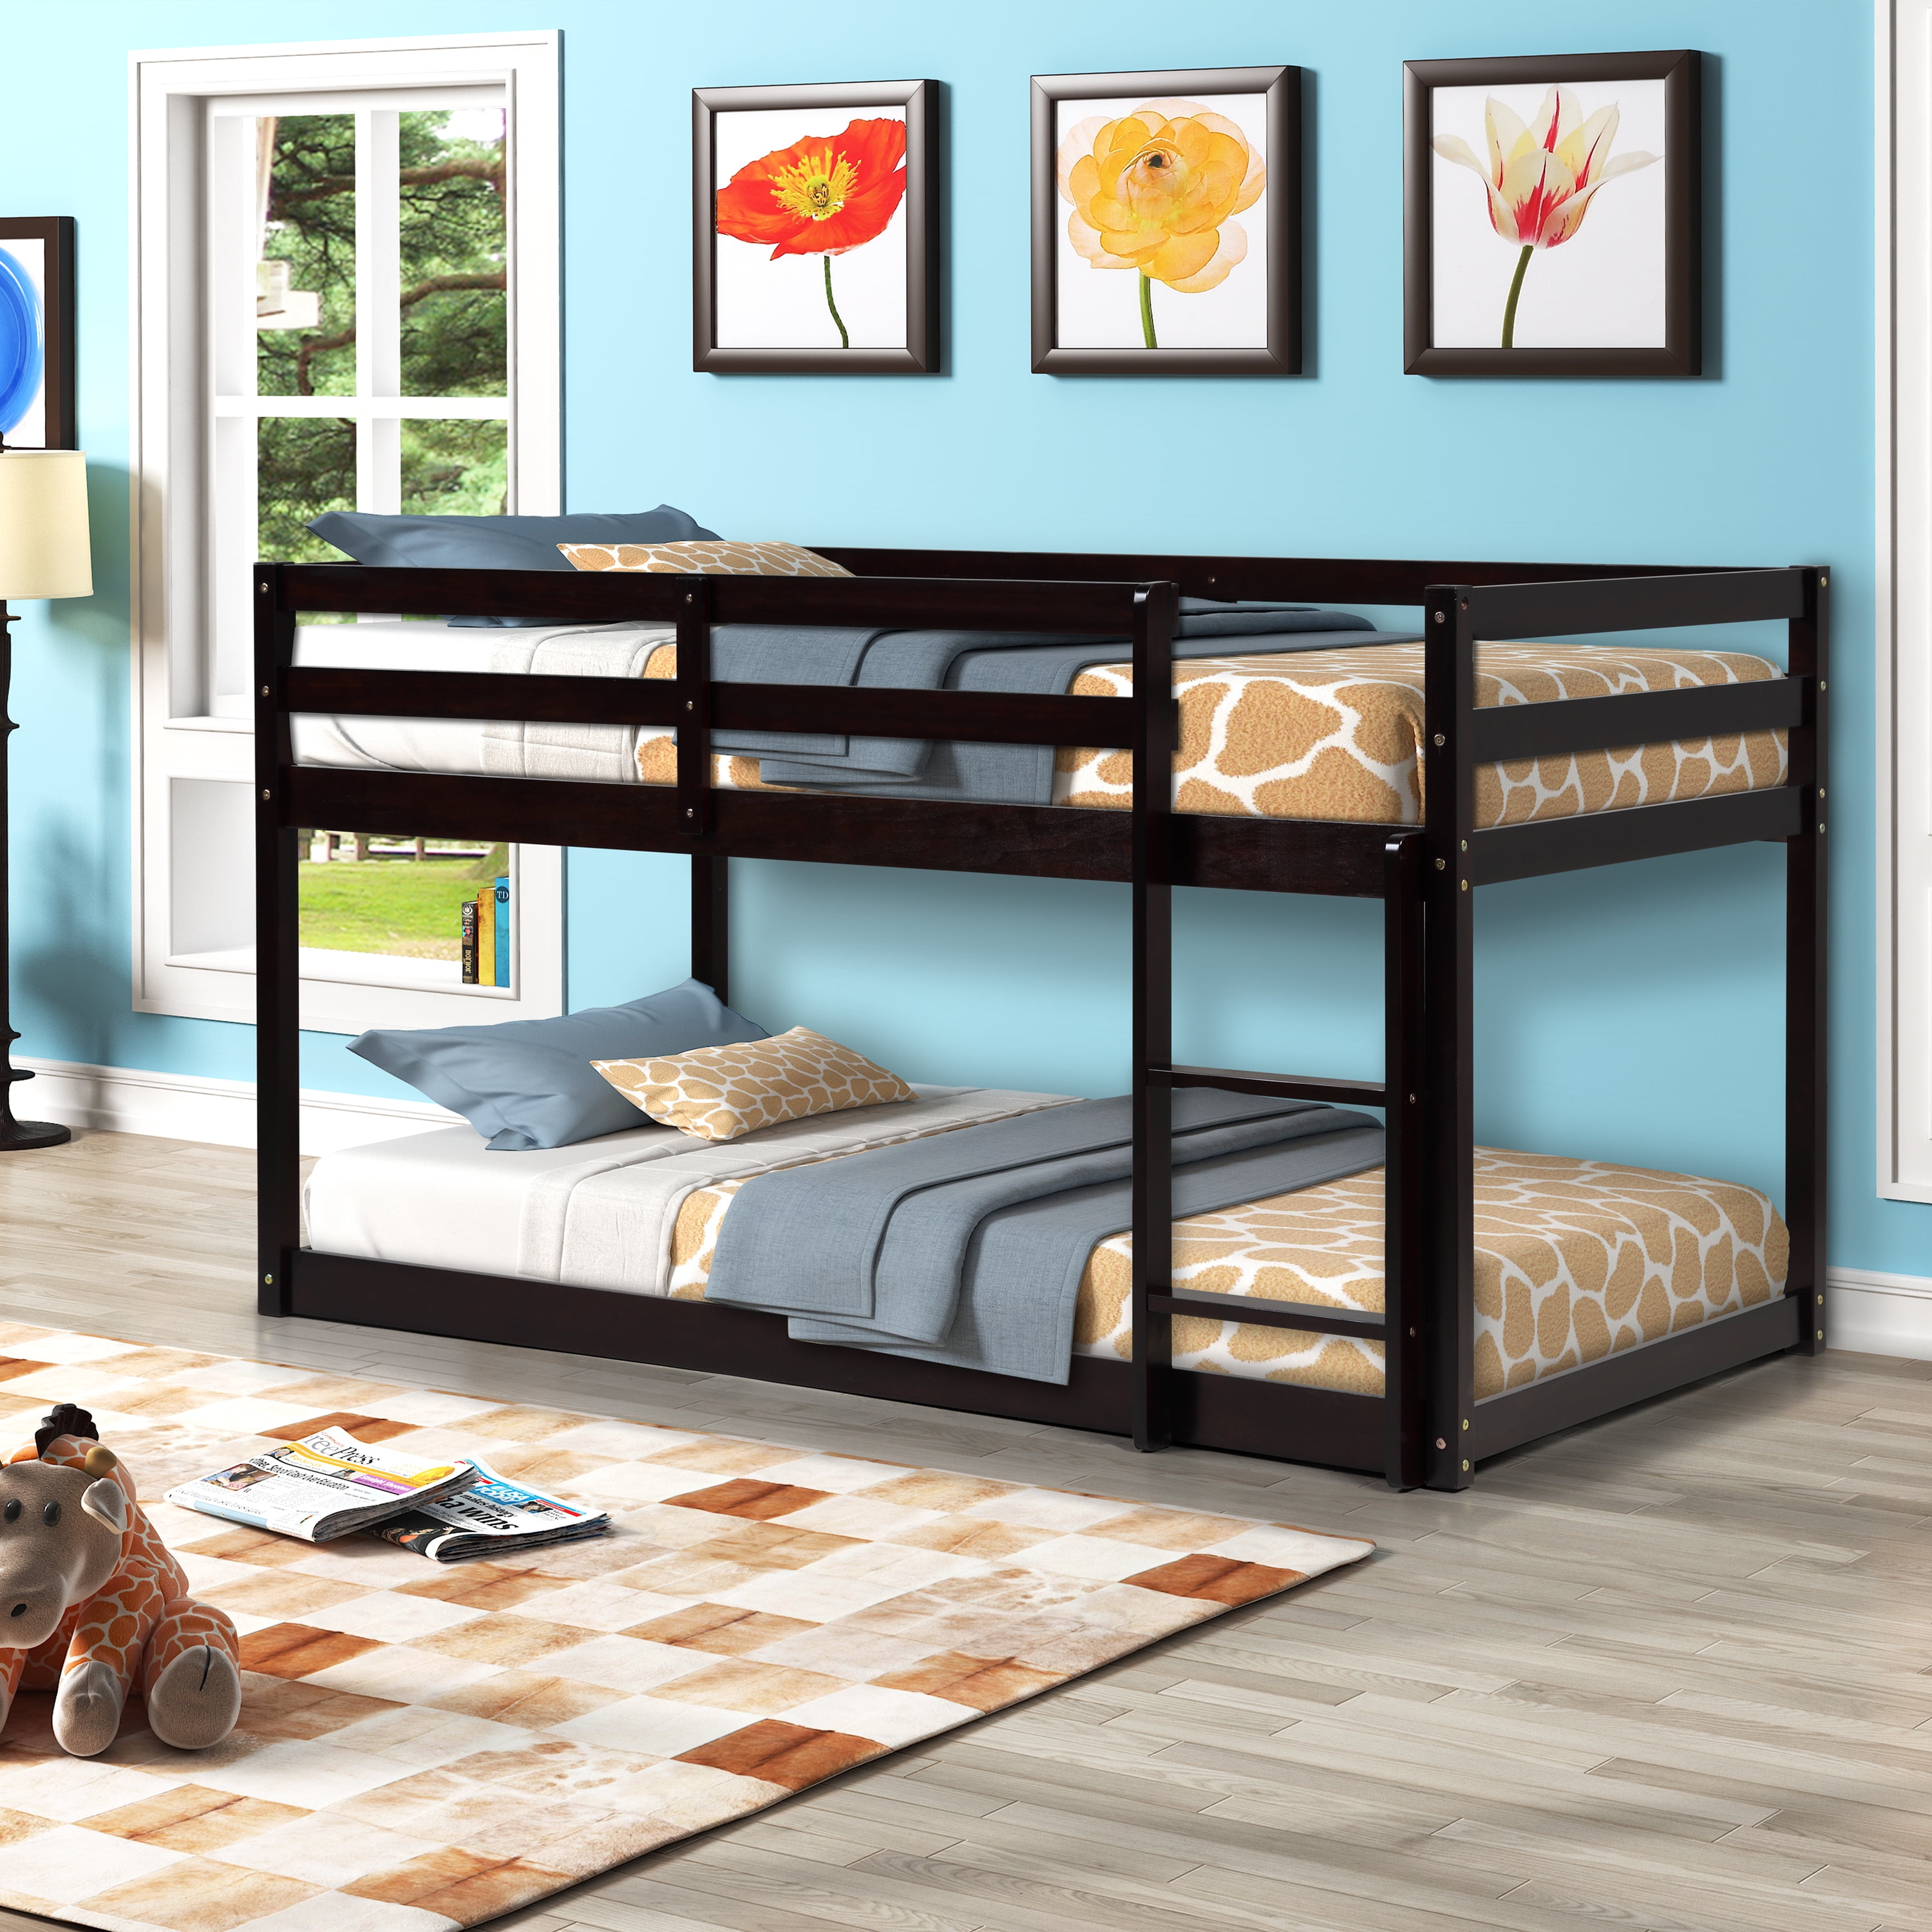 Twin Bunk Bed Frame Pine Wood, Pine Wood Twin Bed Frame